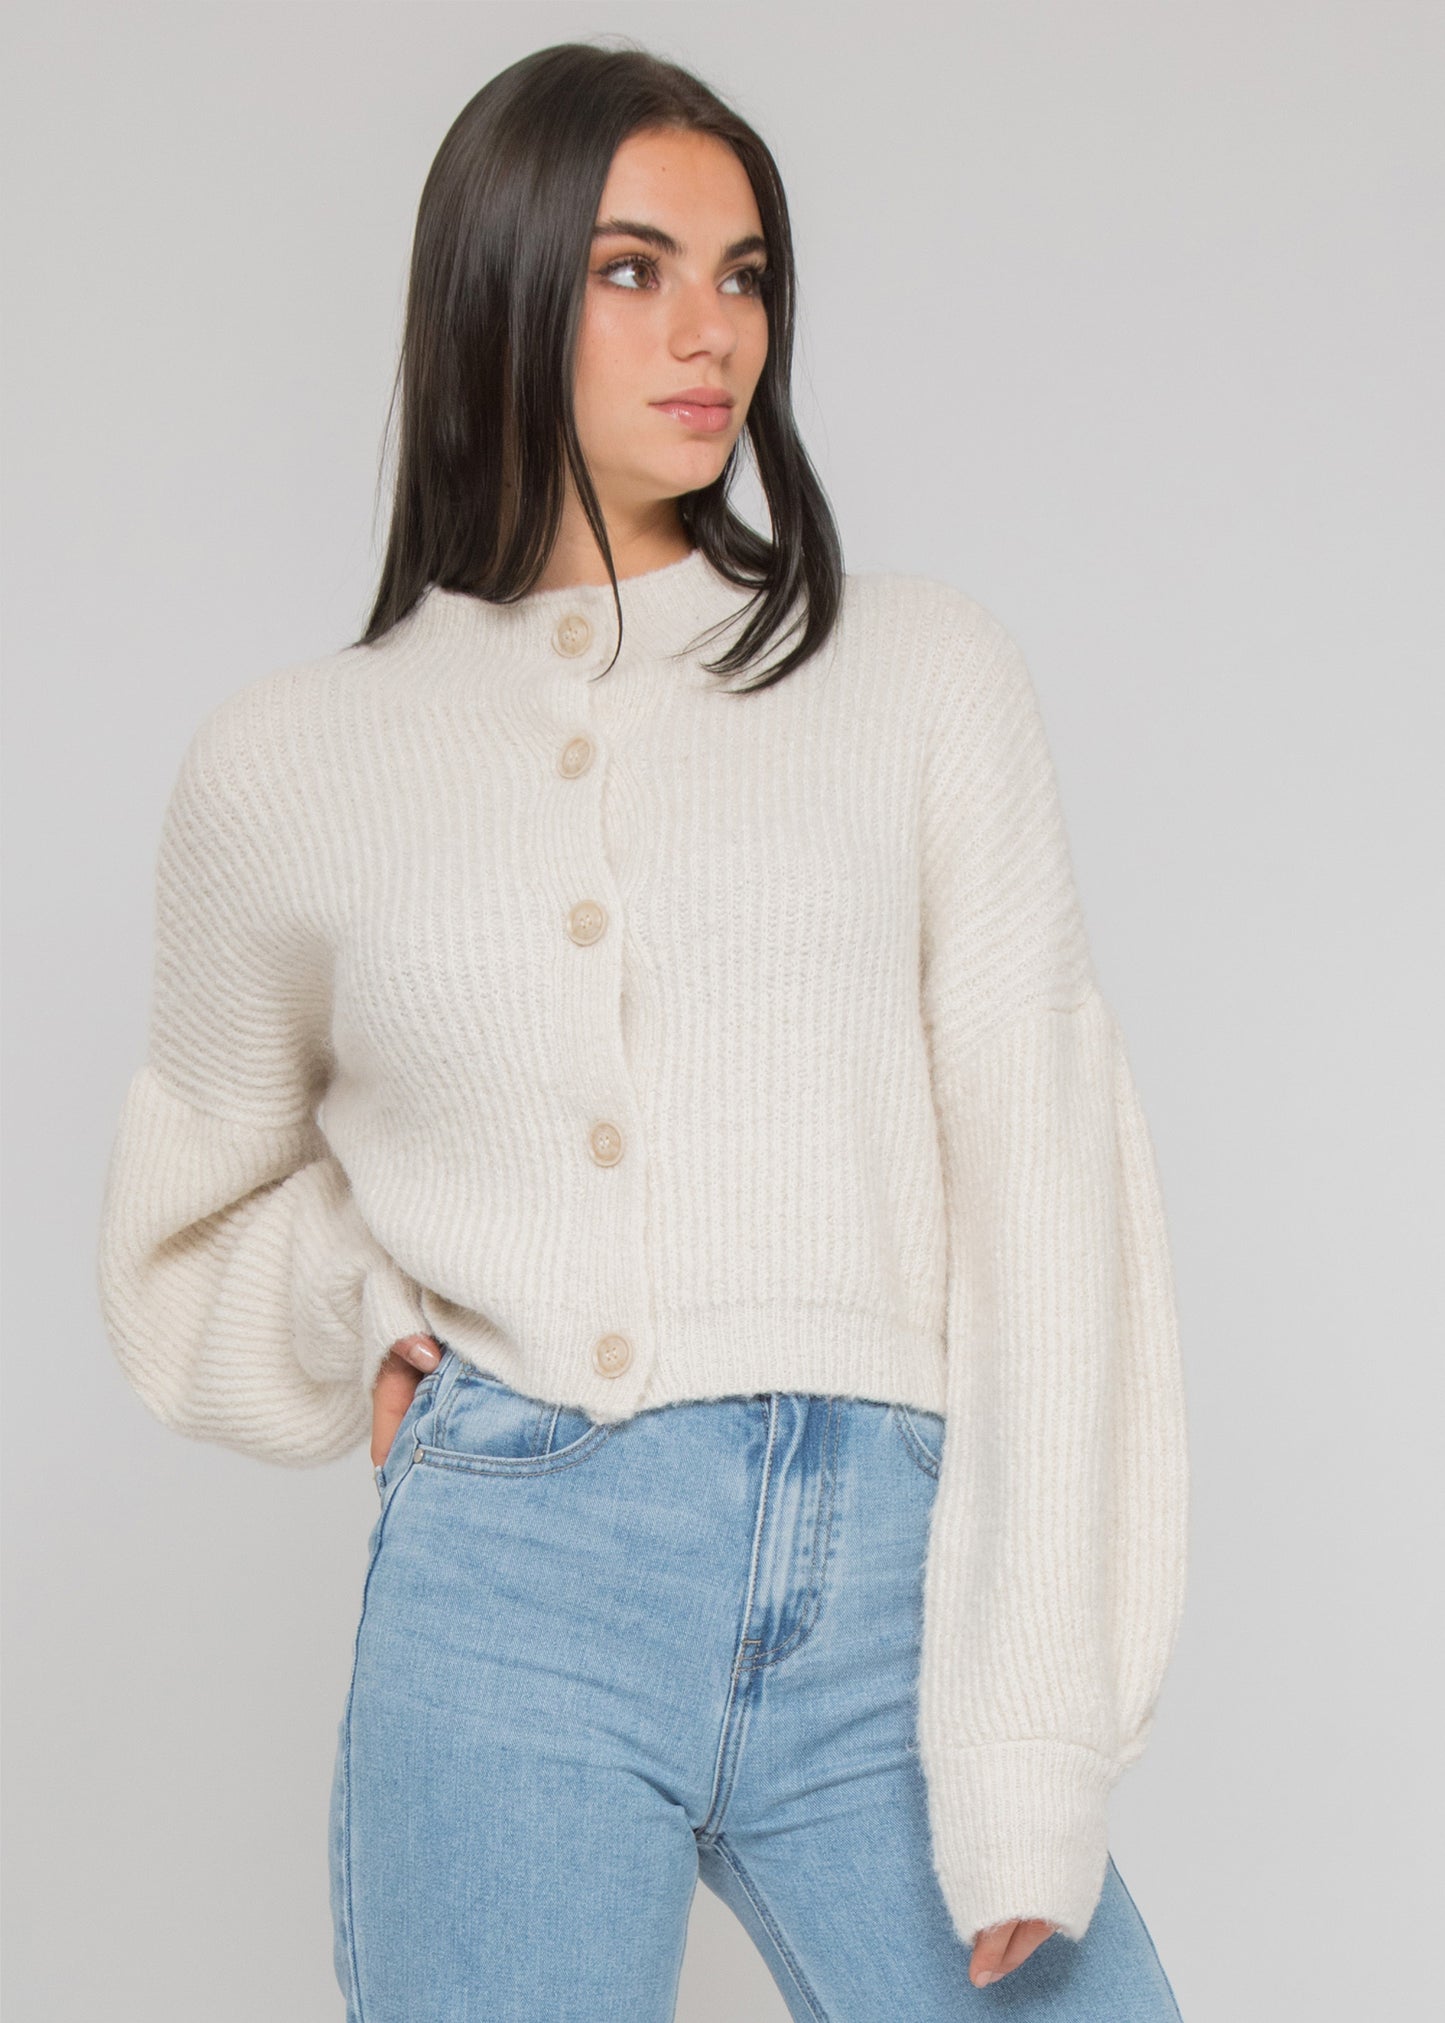 High neck knitted cardigan with buttons in beige